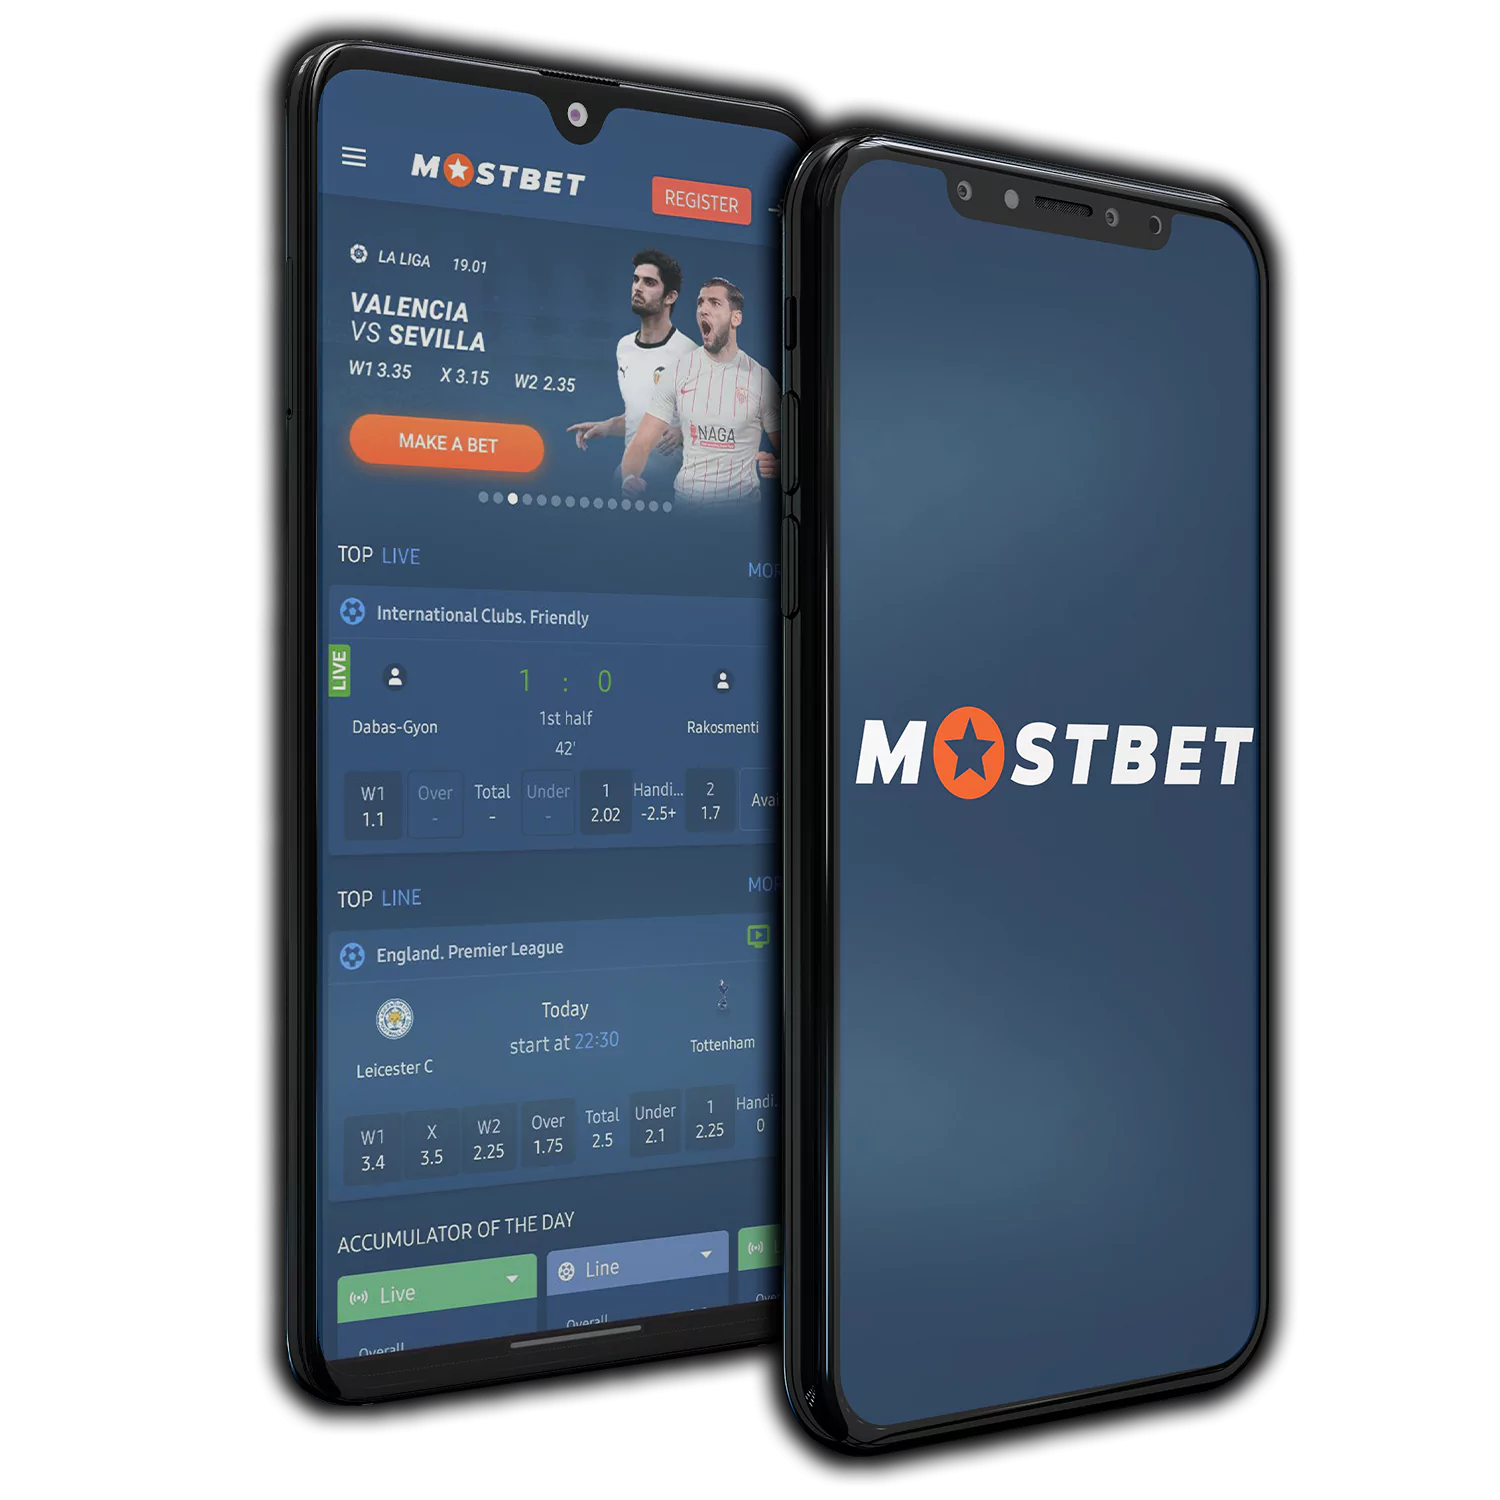 10 Secret Things You Didn't Know About Exciting online casino Mostbet in Turkey